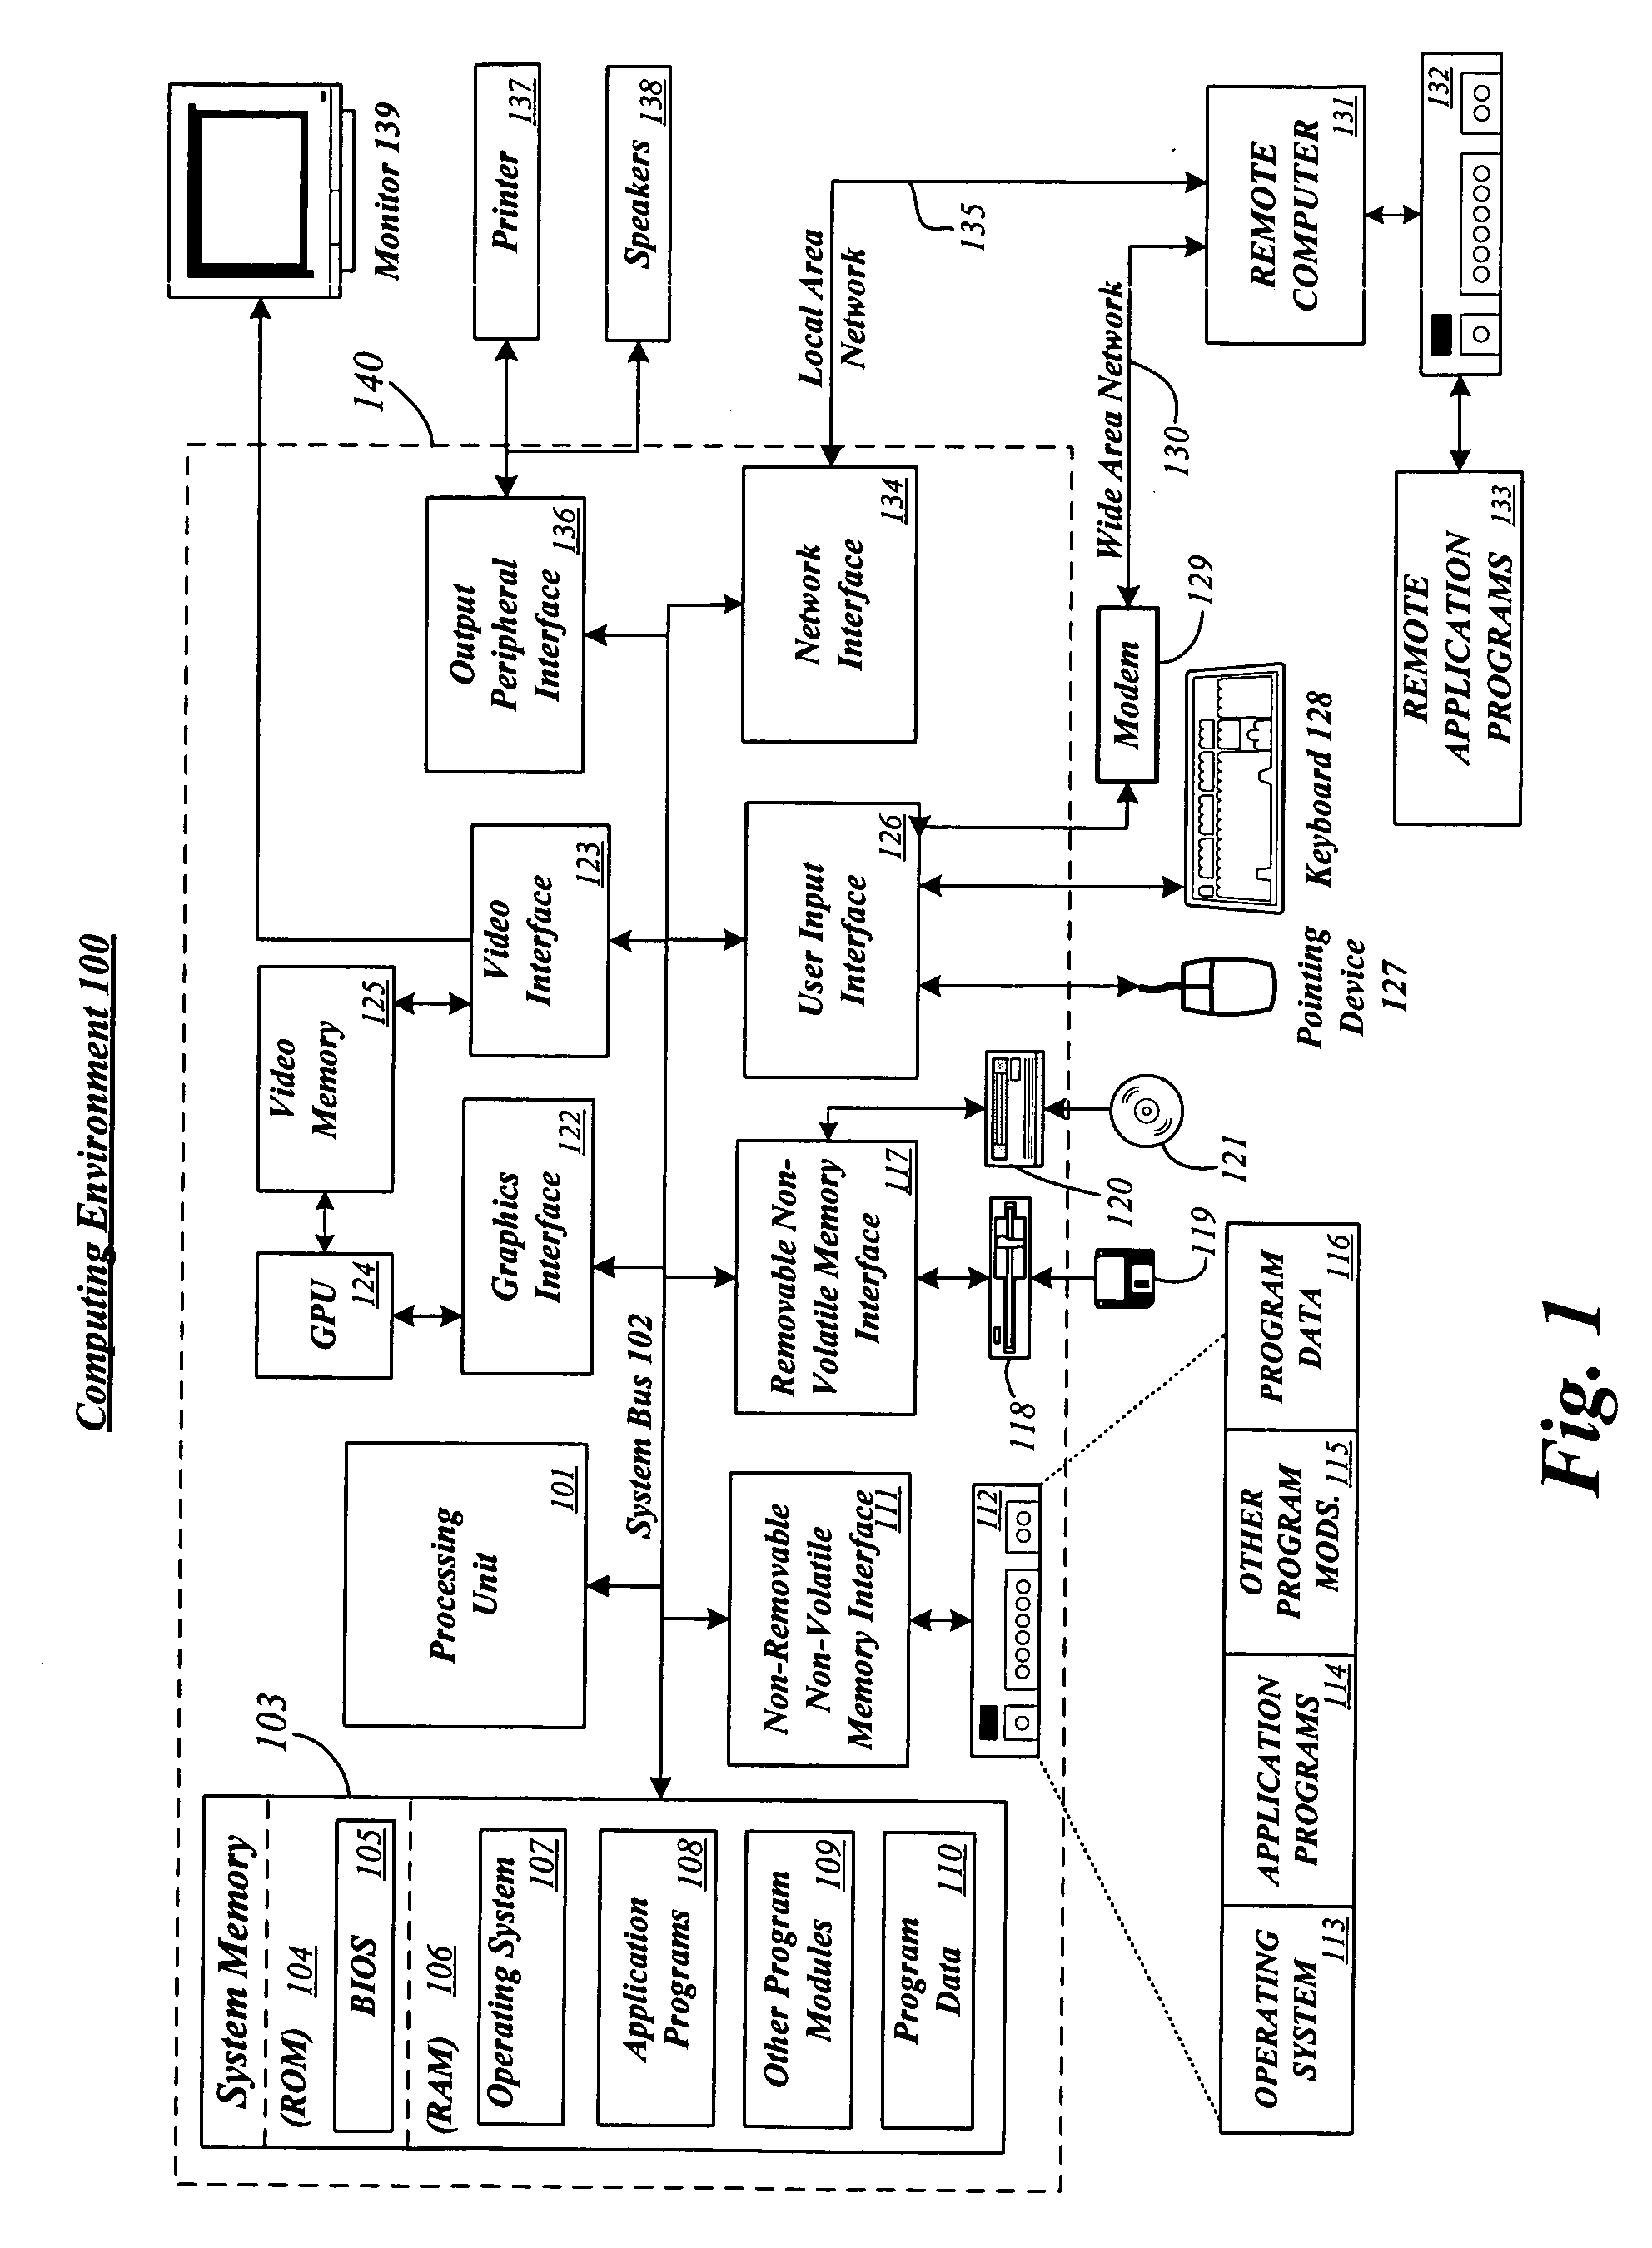 Systems and methods for updating a secure boot process on a computer with a hardware security module